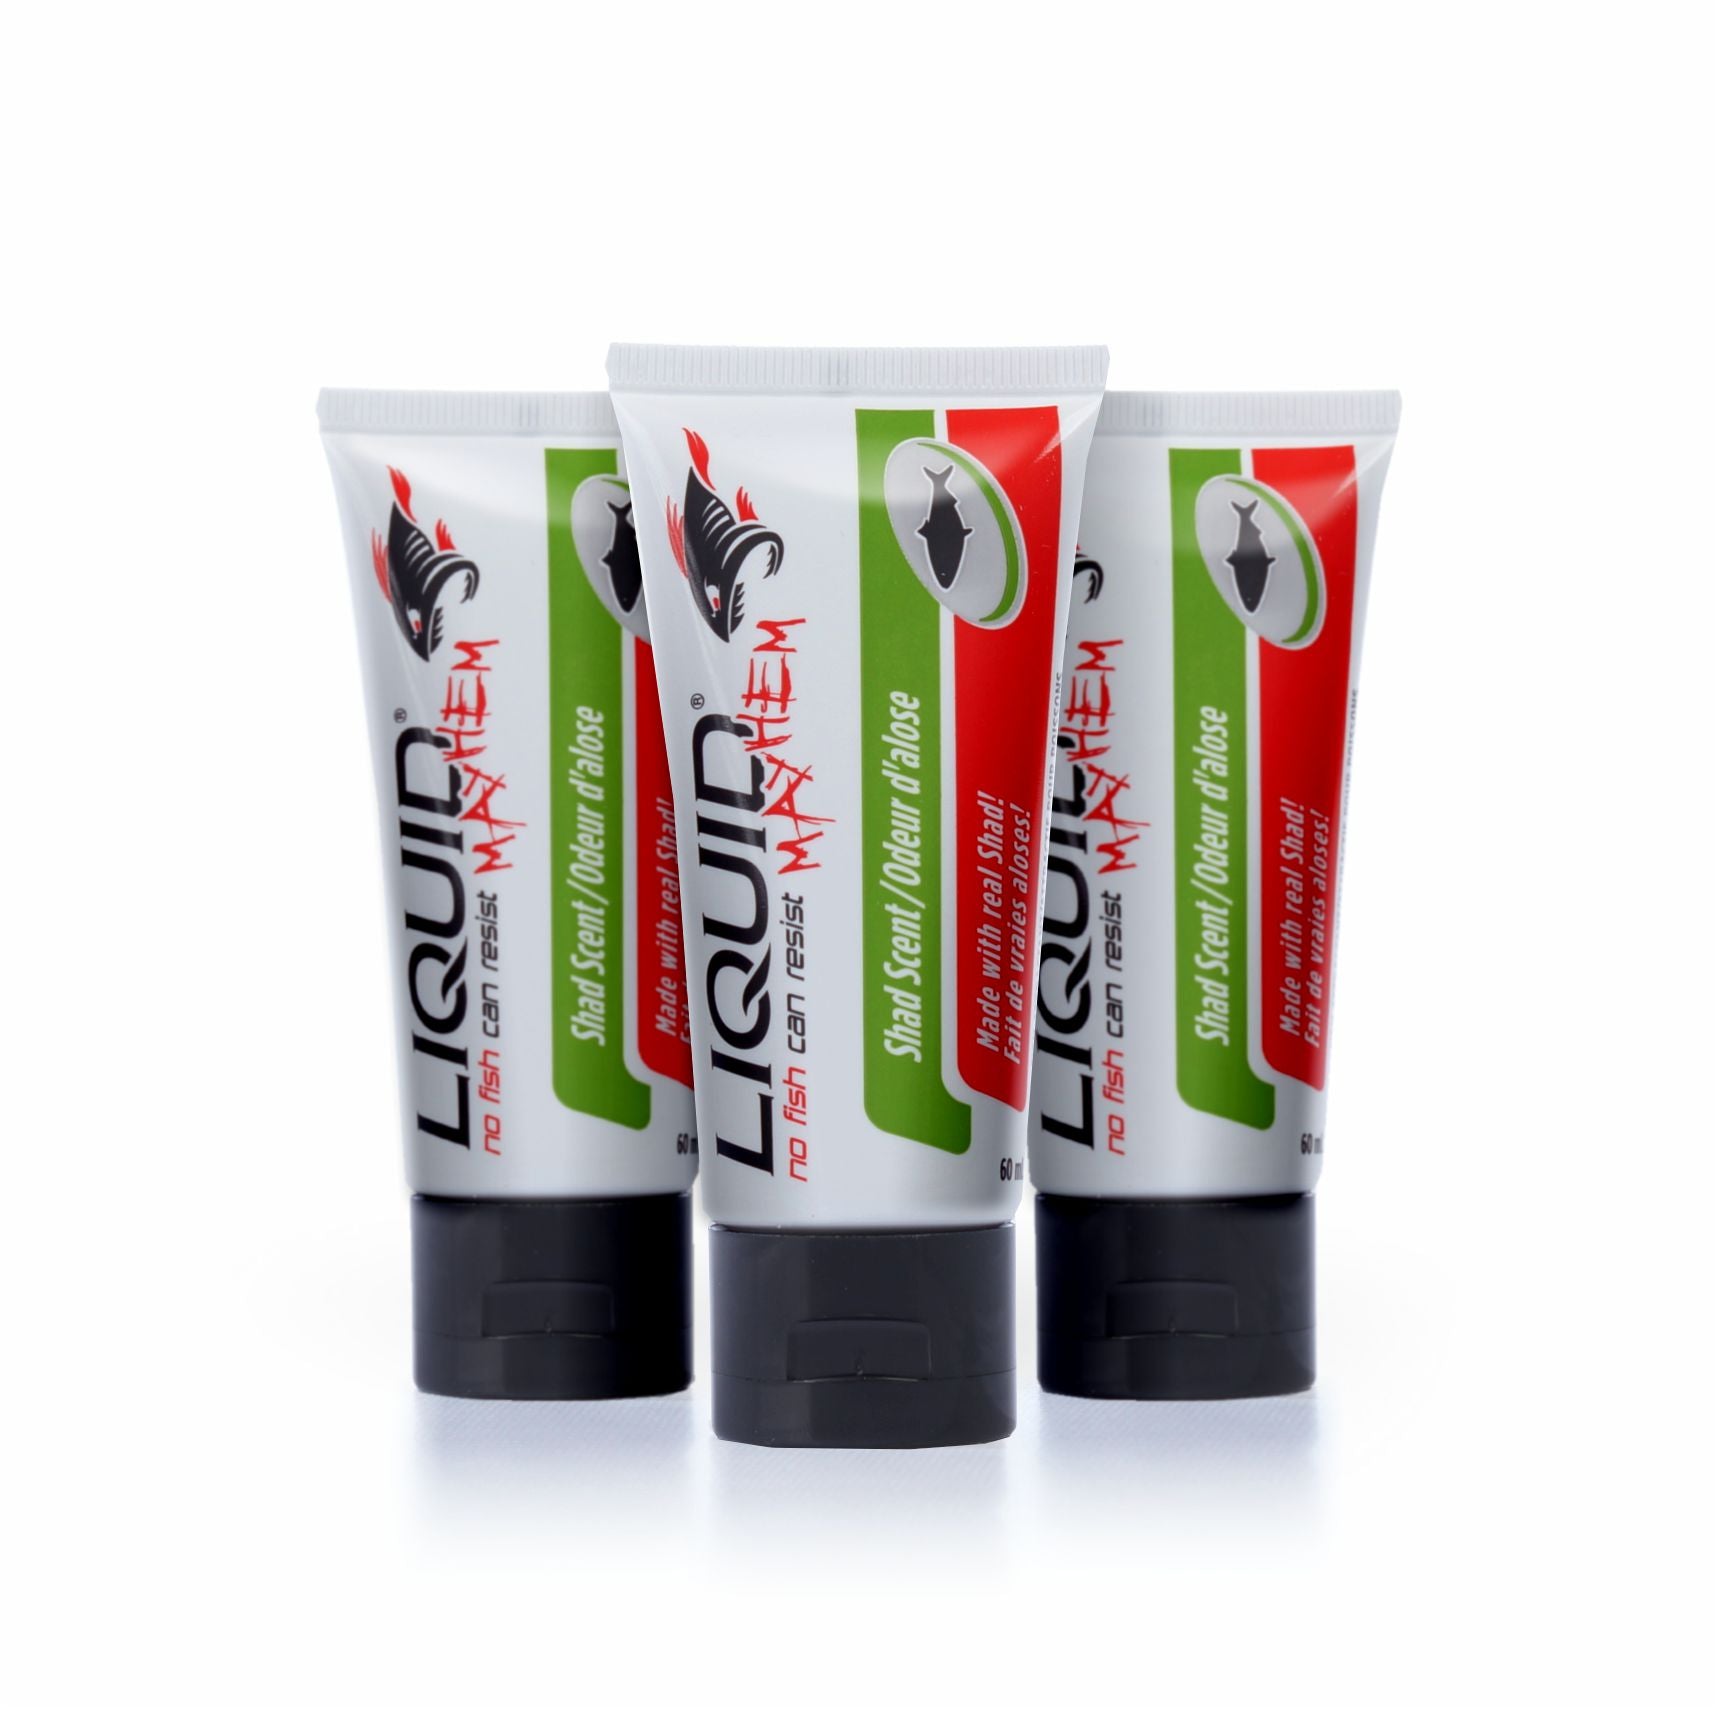 Tench Liquid Fishing Attractants & Scents for sale